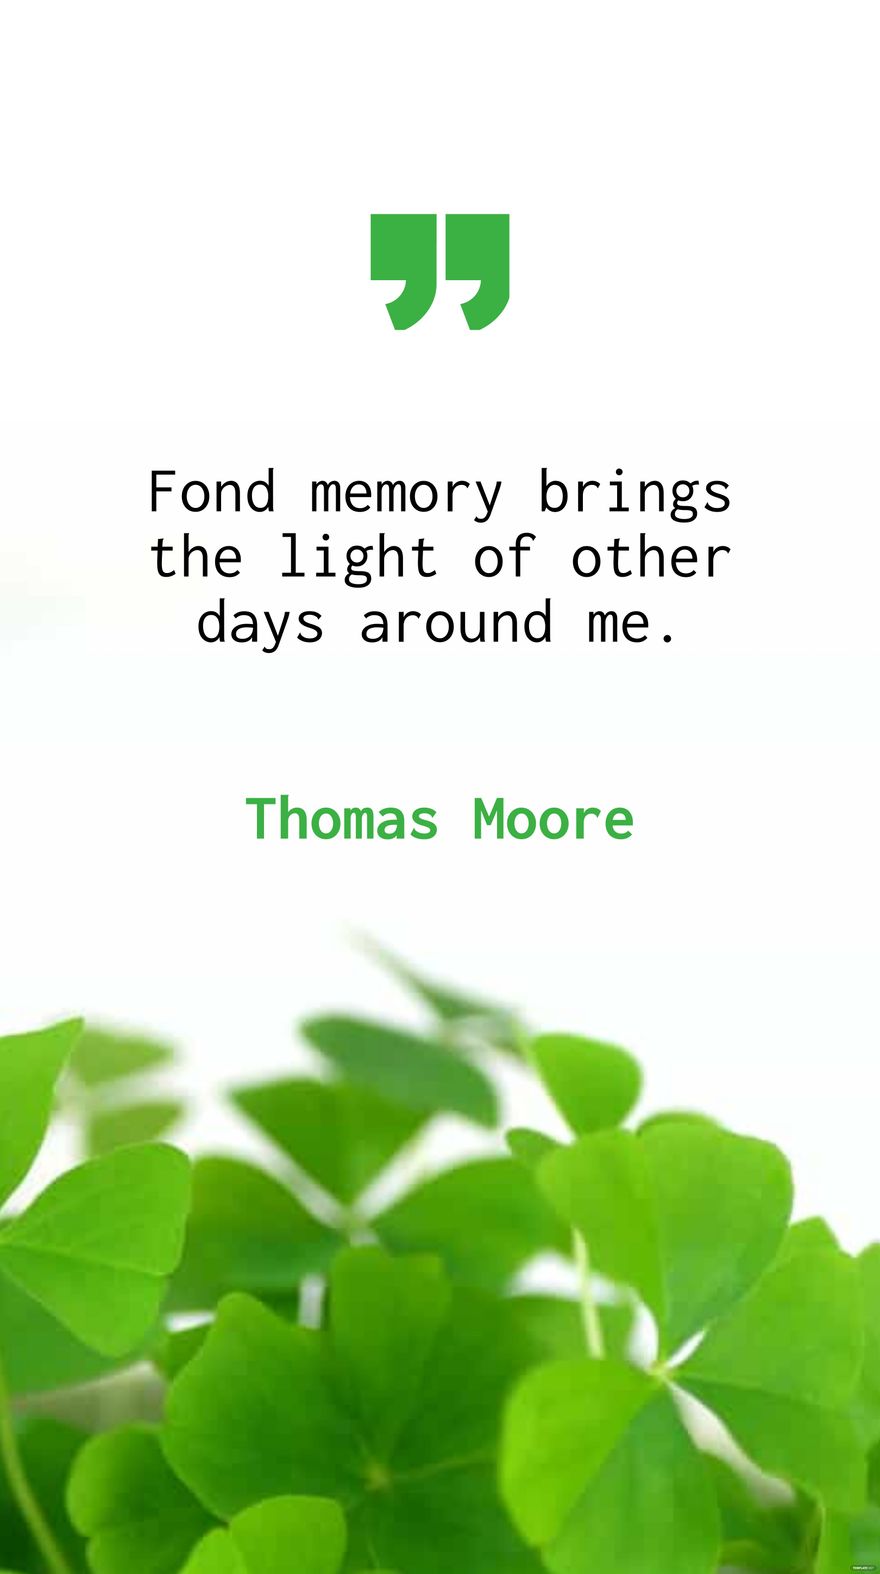 Free Thomas Moore - Fond memory brings the light of other days around me.